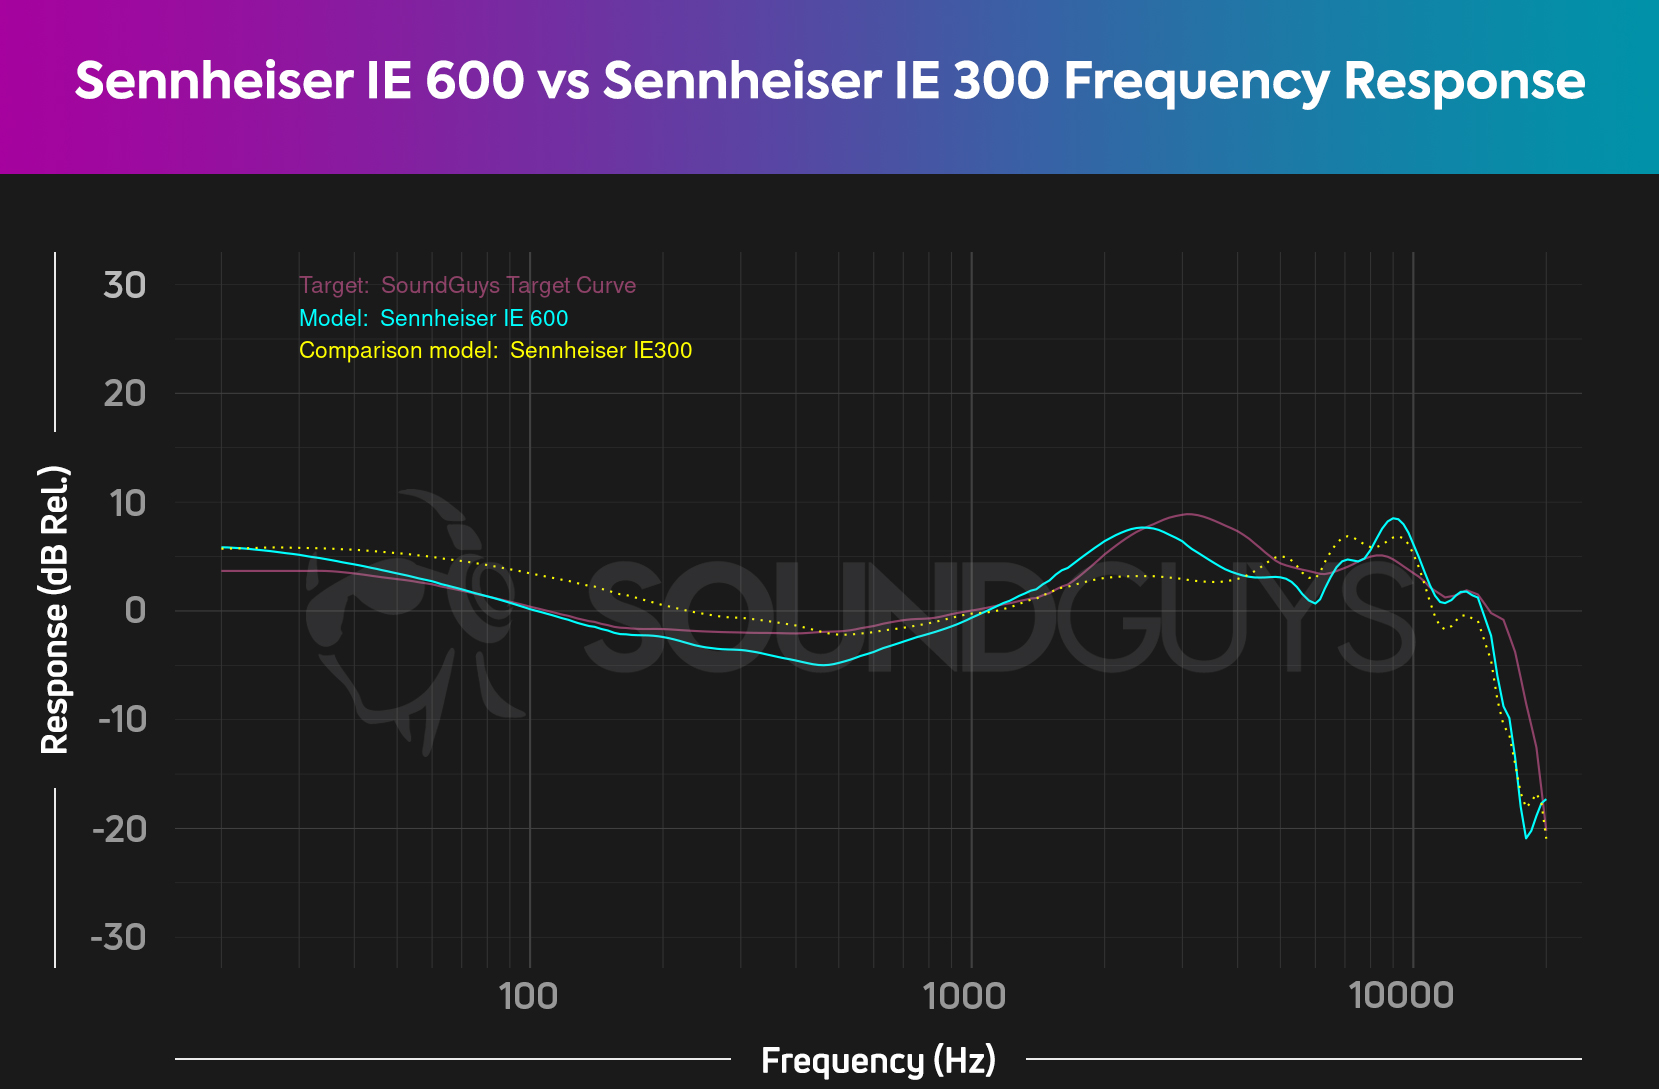 A frequency response shows a comparison between the Sennheiser IE 600 and Sennheiser IE 300.